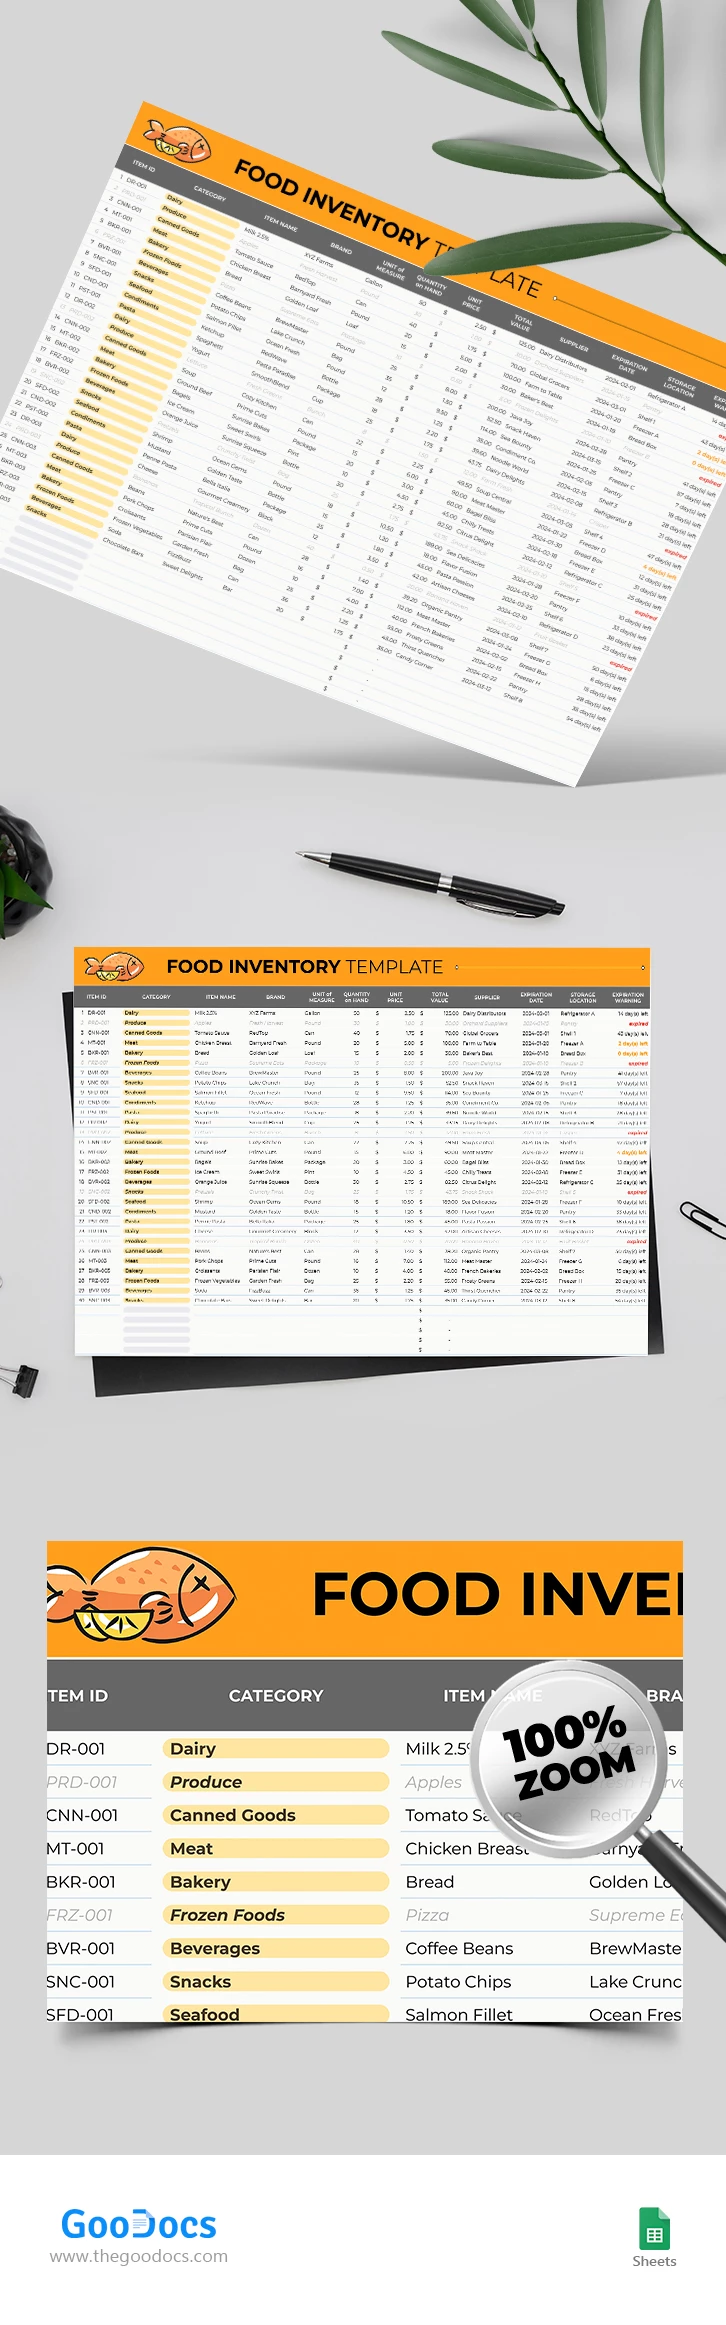 Food Inventory - free Google Docs Template - 10067935